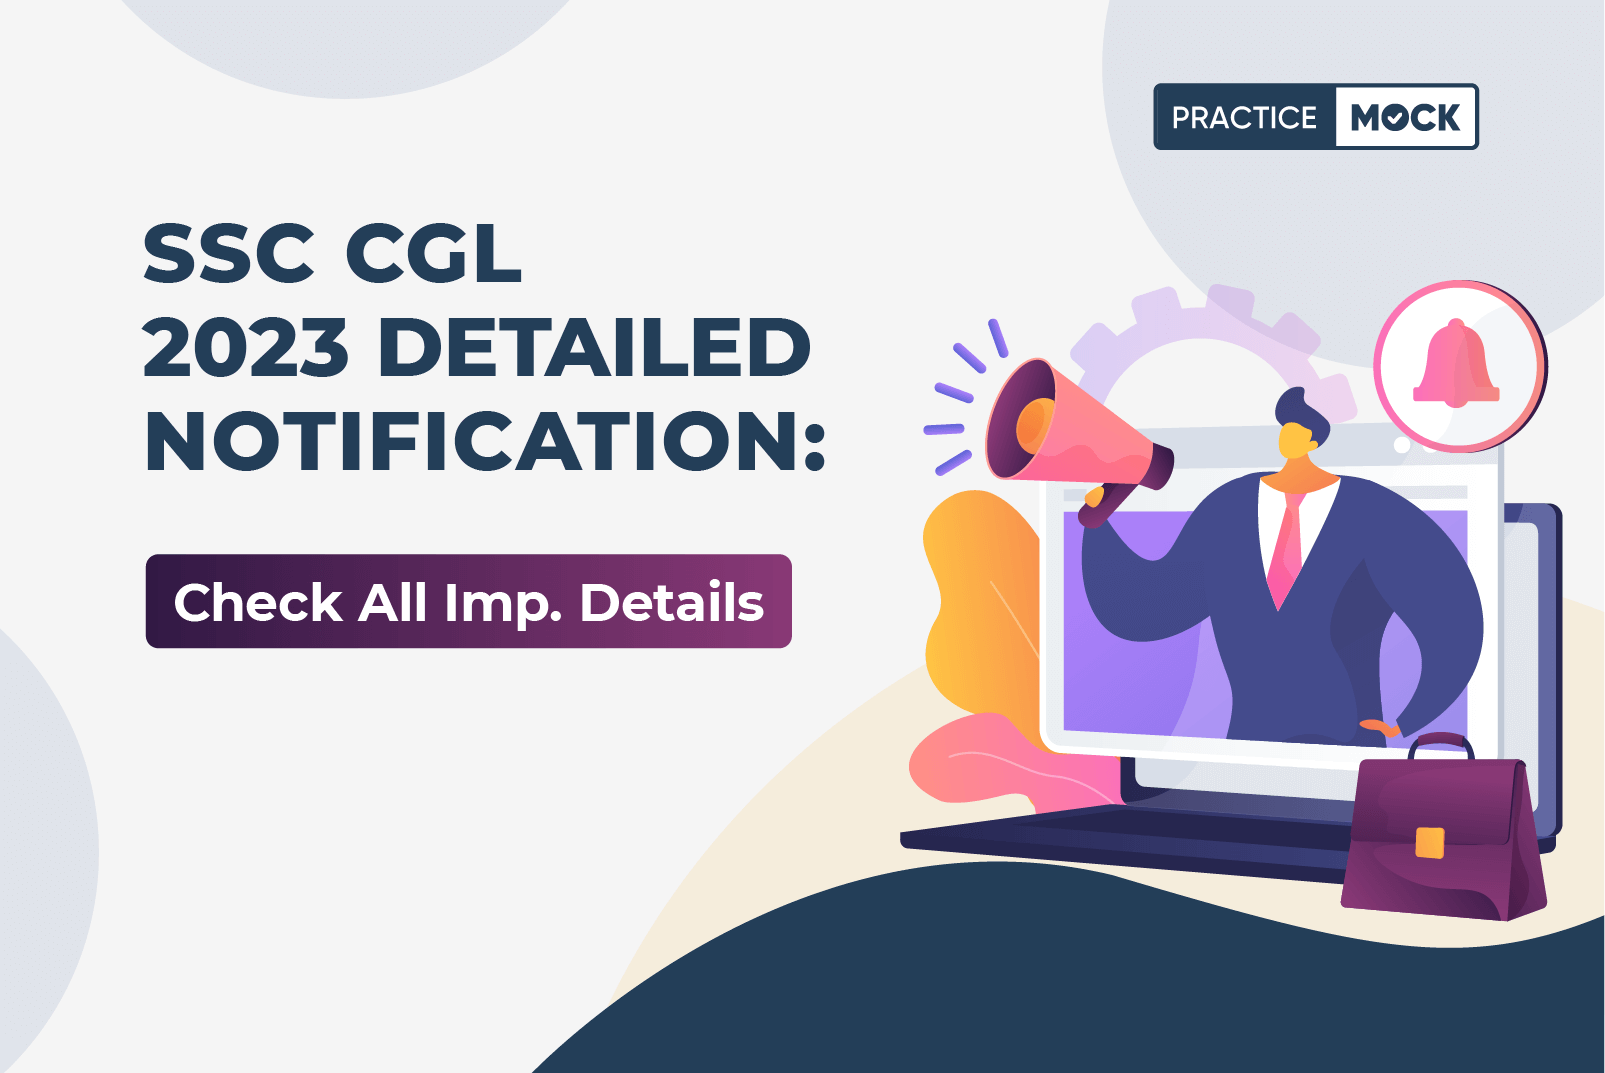 SSC CGL 2023 Detailed Notification- Check All Imp. Details